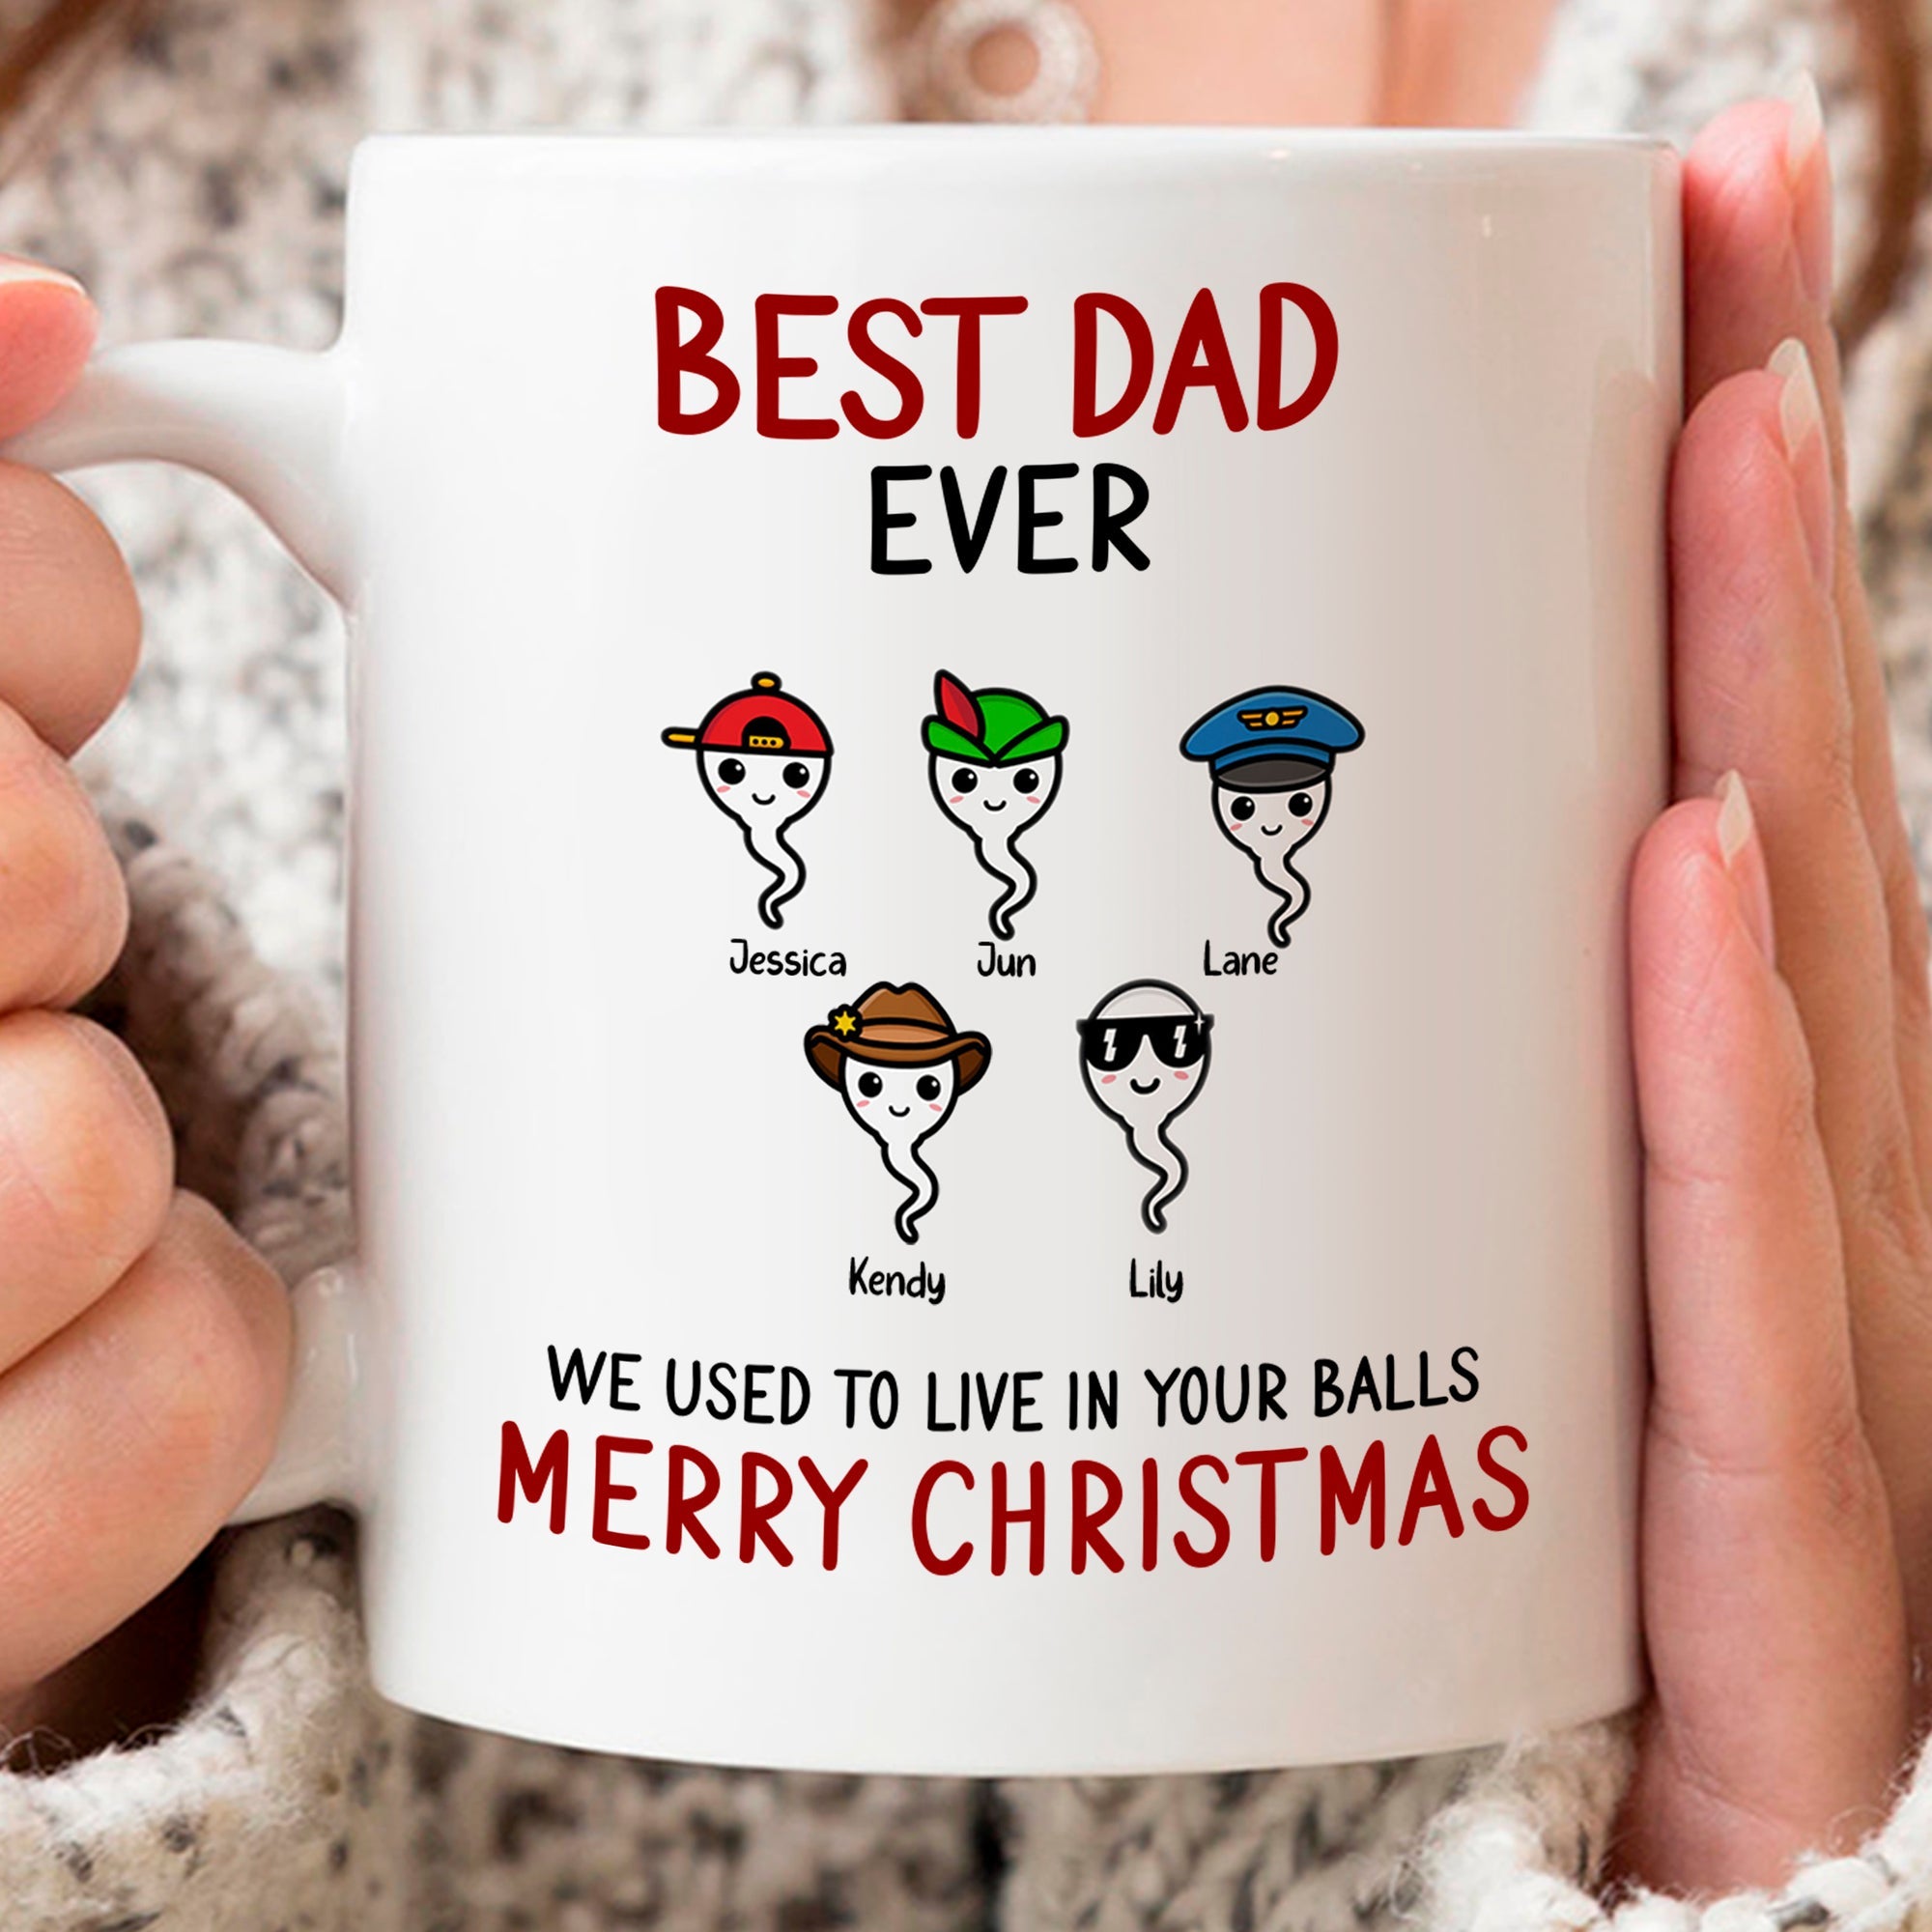 Best Dad Ever We Used To Live In Your Balls - Gift For Dad - Personalized Ceramic Mug